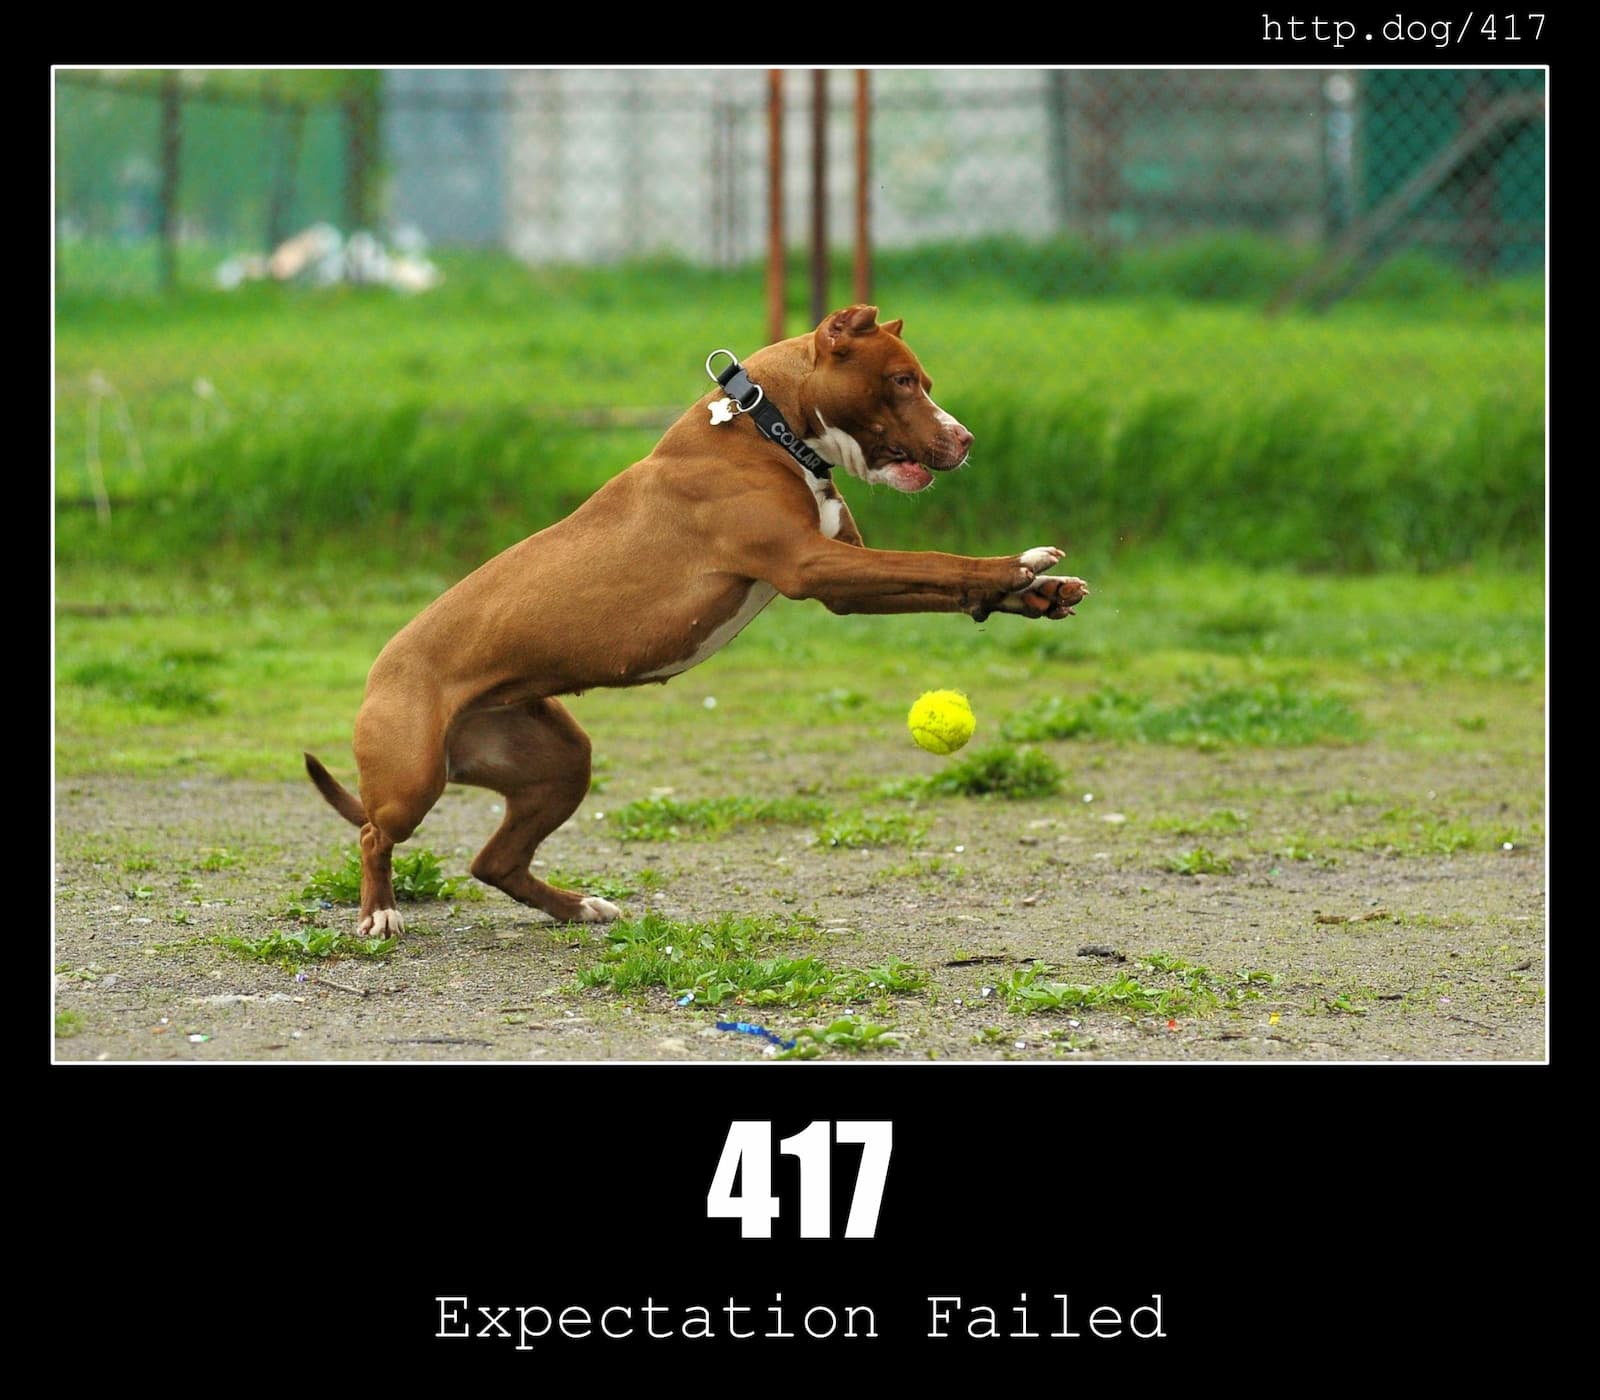 HTTP Status Code 417 Expectation Failed & Dogs